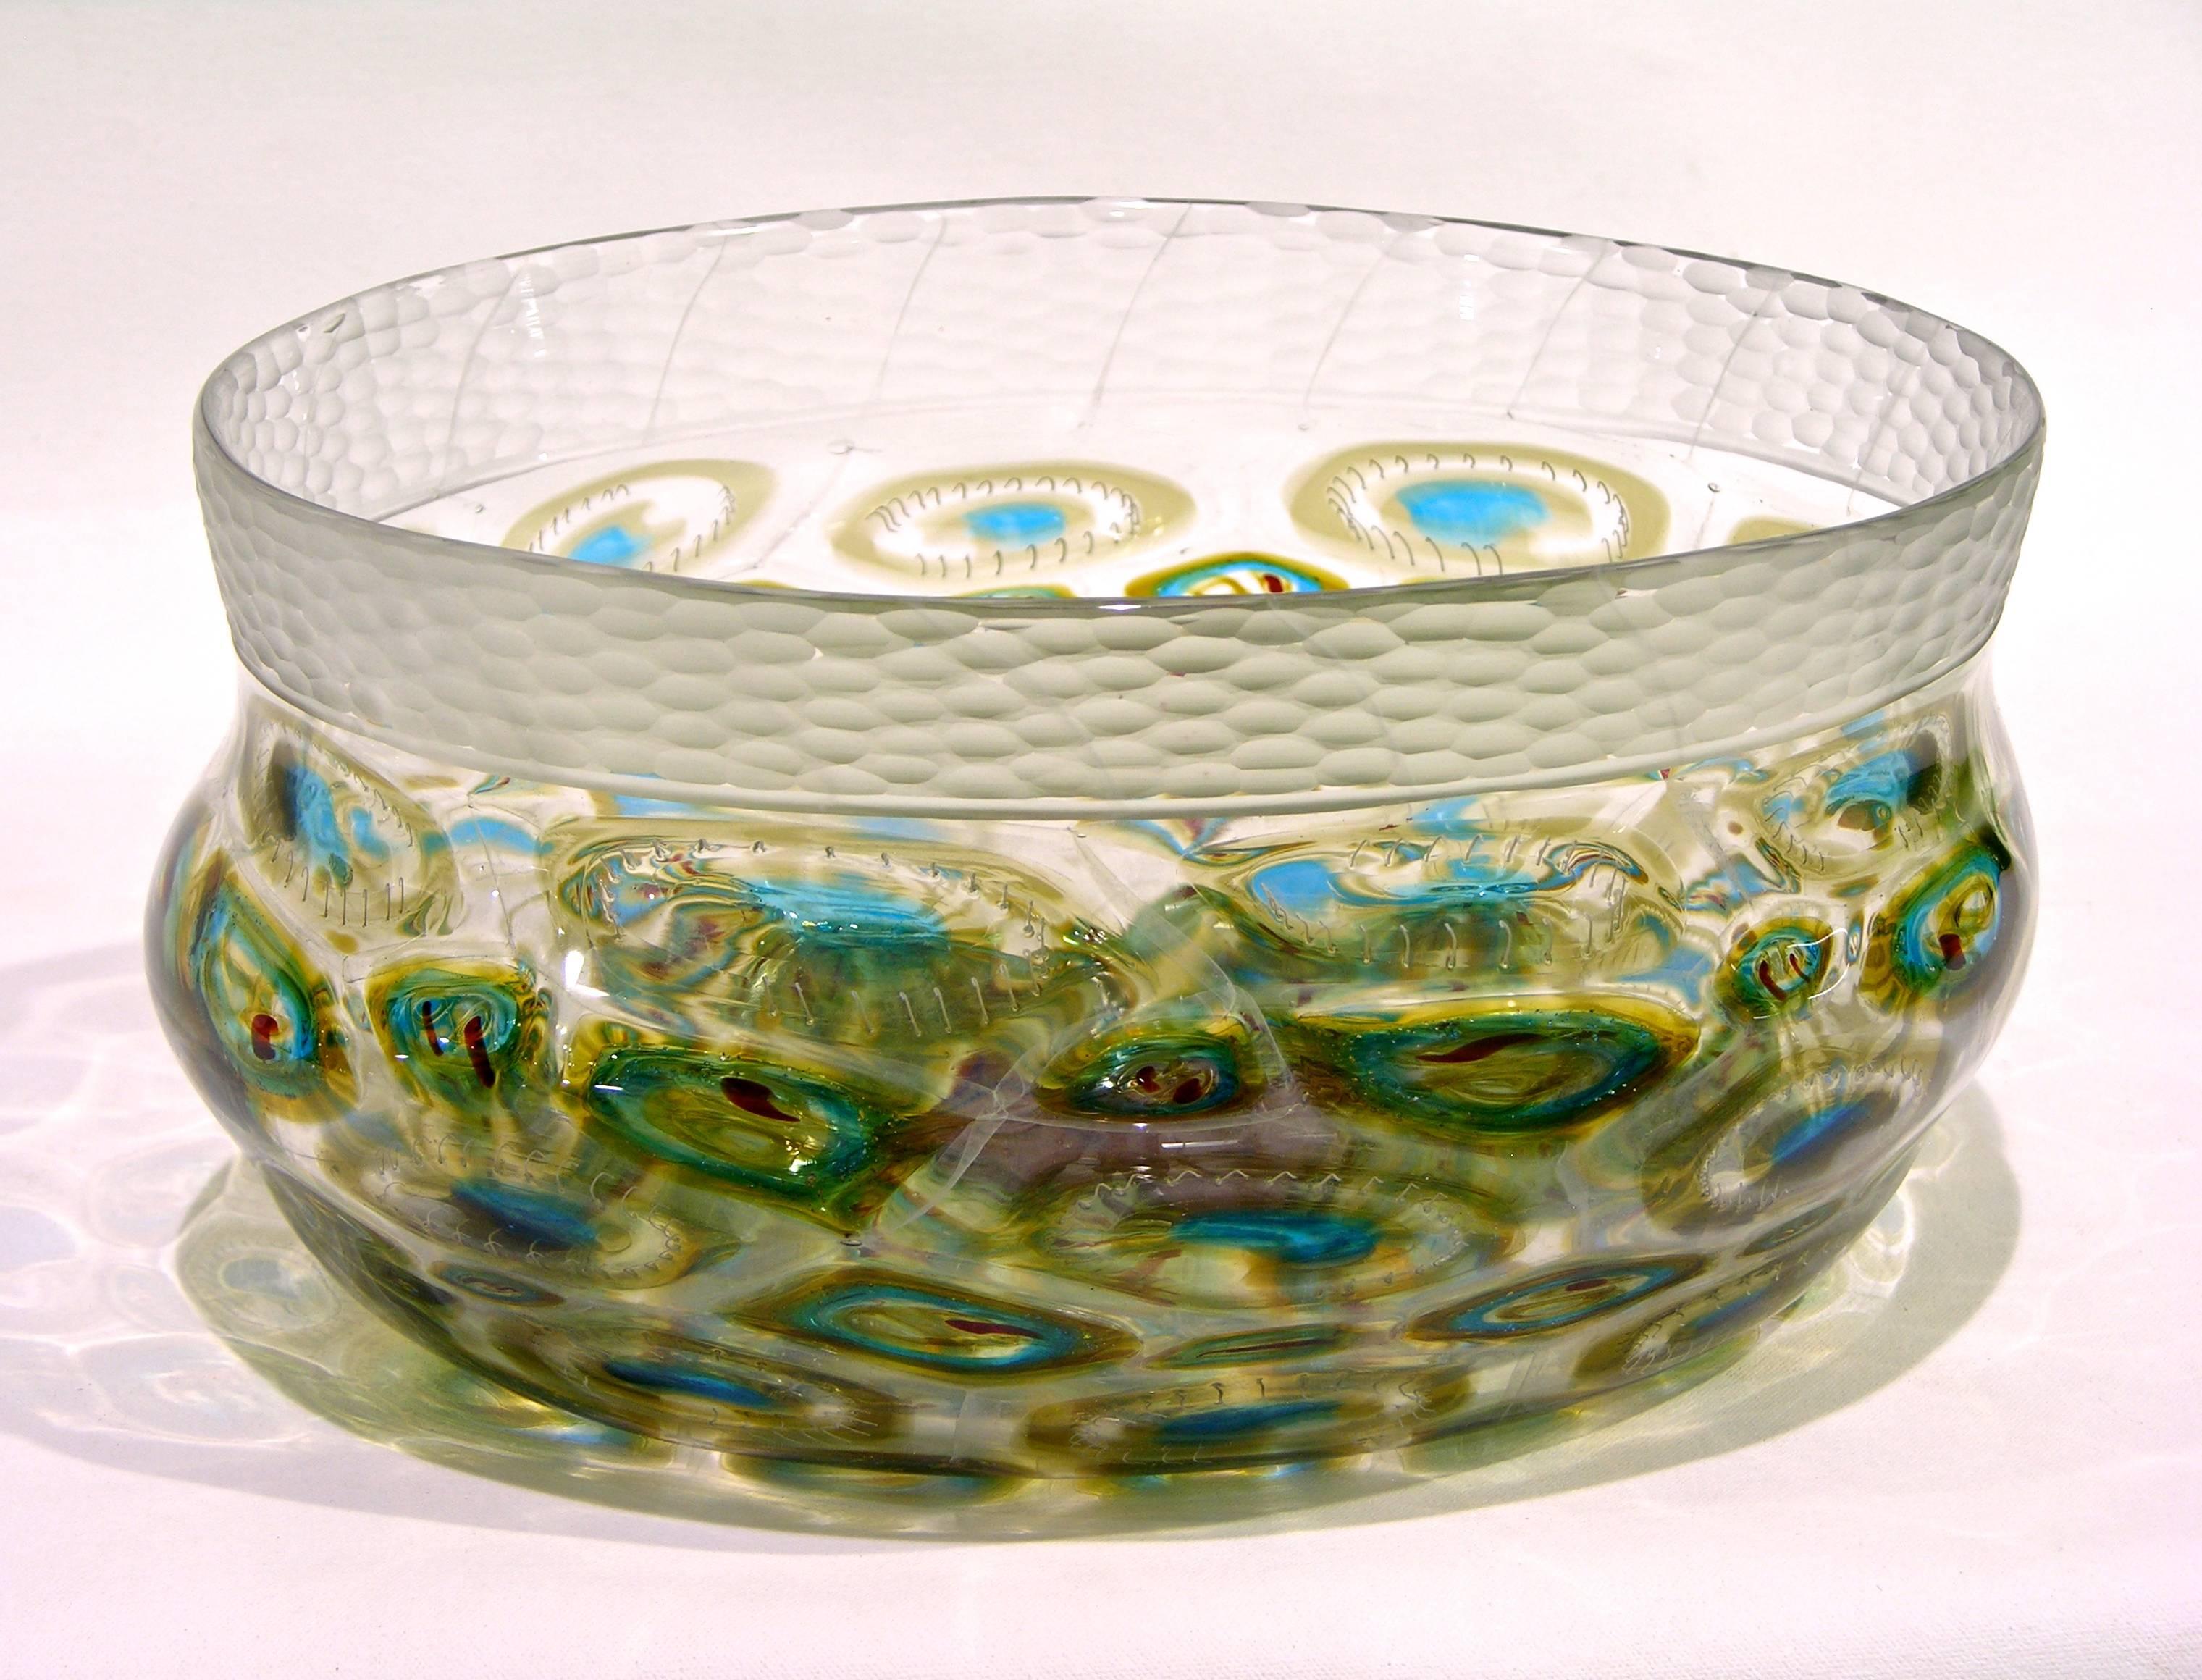 Italian Afro Celotto Art Deco Design Glass Bowl with Peacock Murrine and Silver